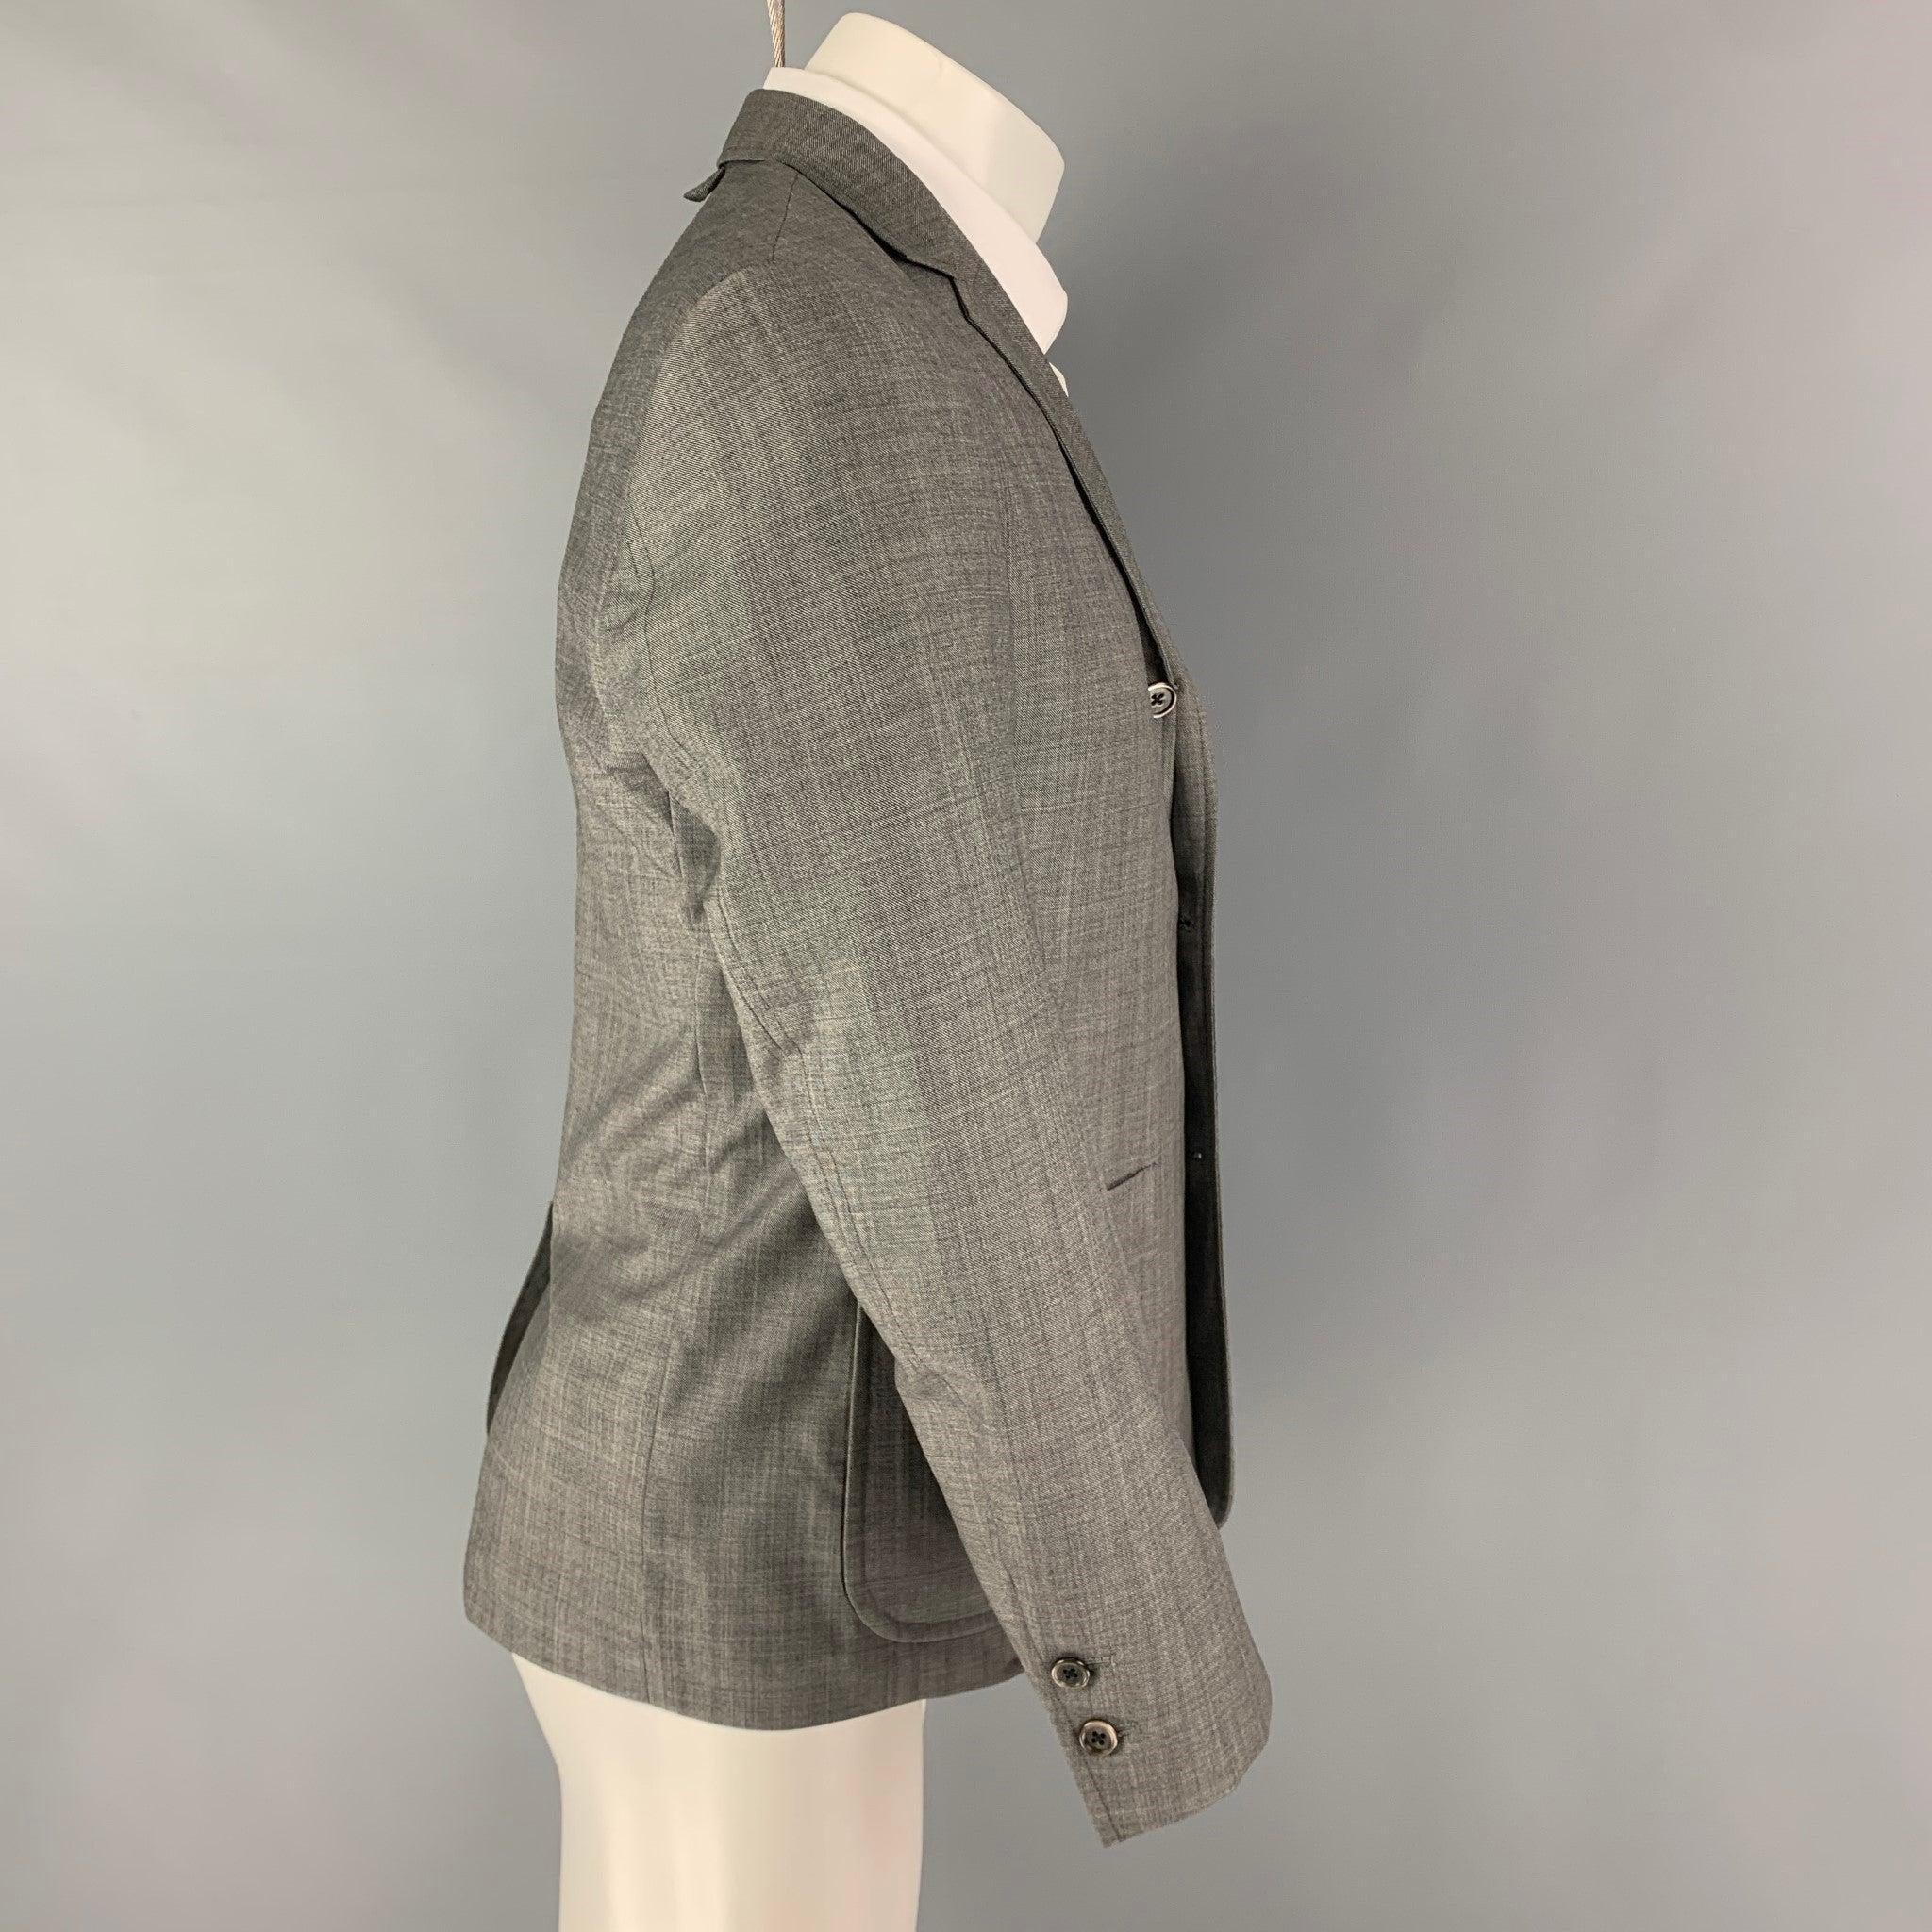 BLACK FLEECE sport coat comes in a grey featuring a notch lapel, patch pockets, single back vent, and a three button closure.
Very Good
Pre-Owned Condition.  

Marked:   BB1 

Measurements: 
  
Shoulder: 17 inches Chest:
38 inches Sleeve:
24 inches